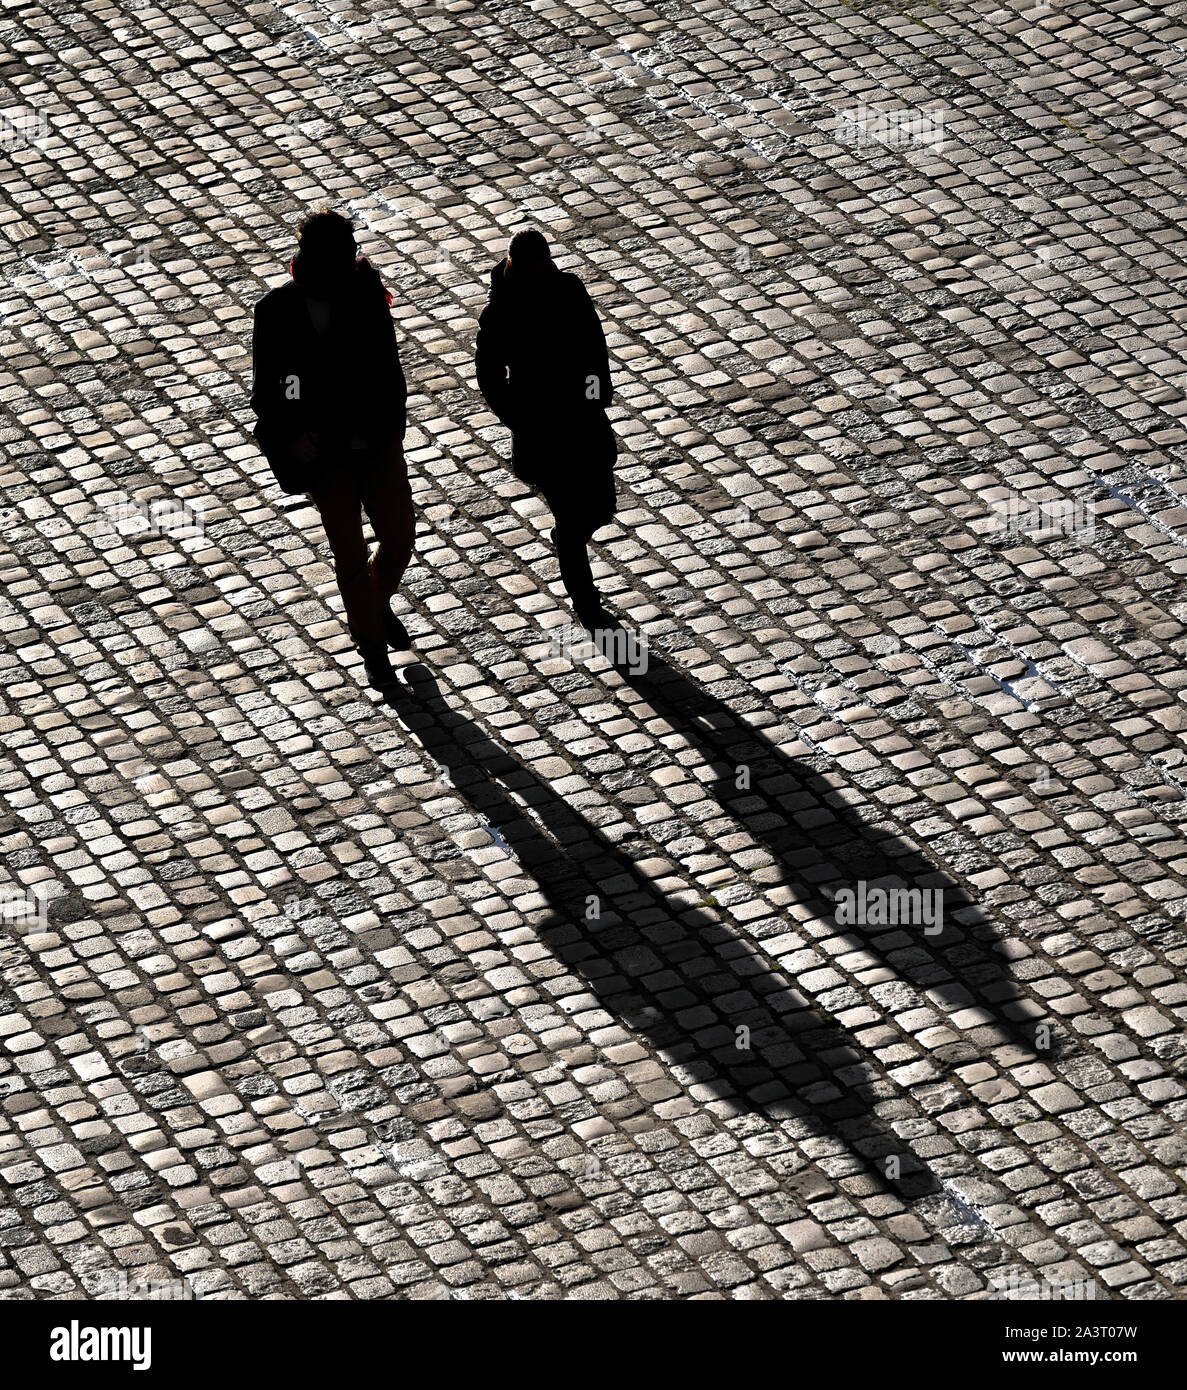 Two bystanders walking on a paved road, projecting their shadows. Stock Photo